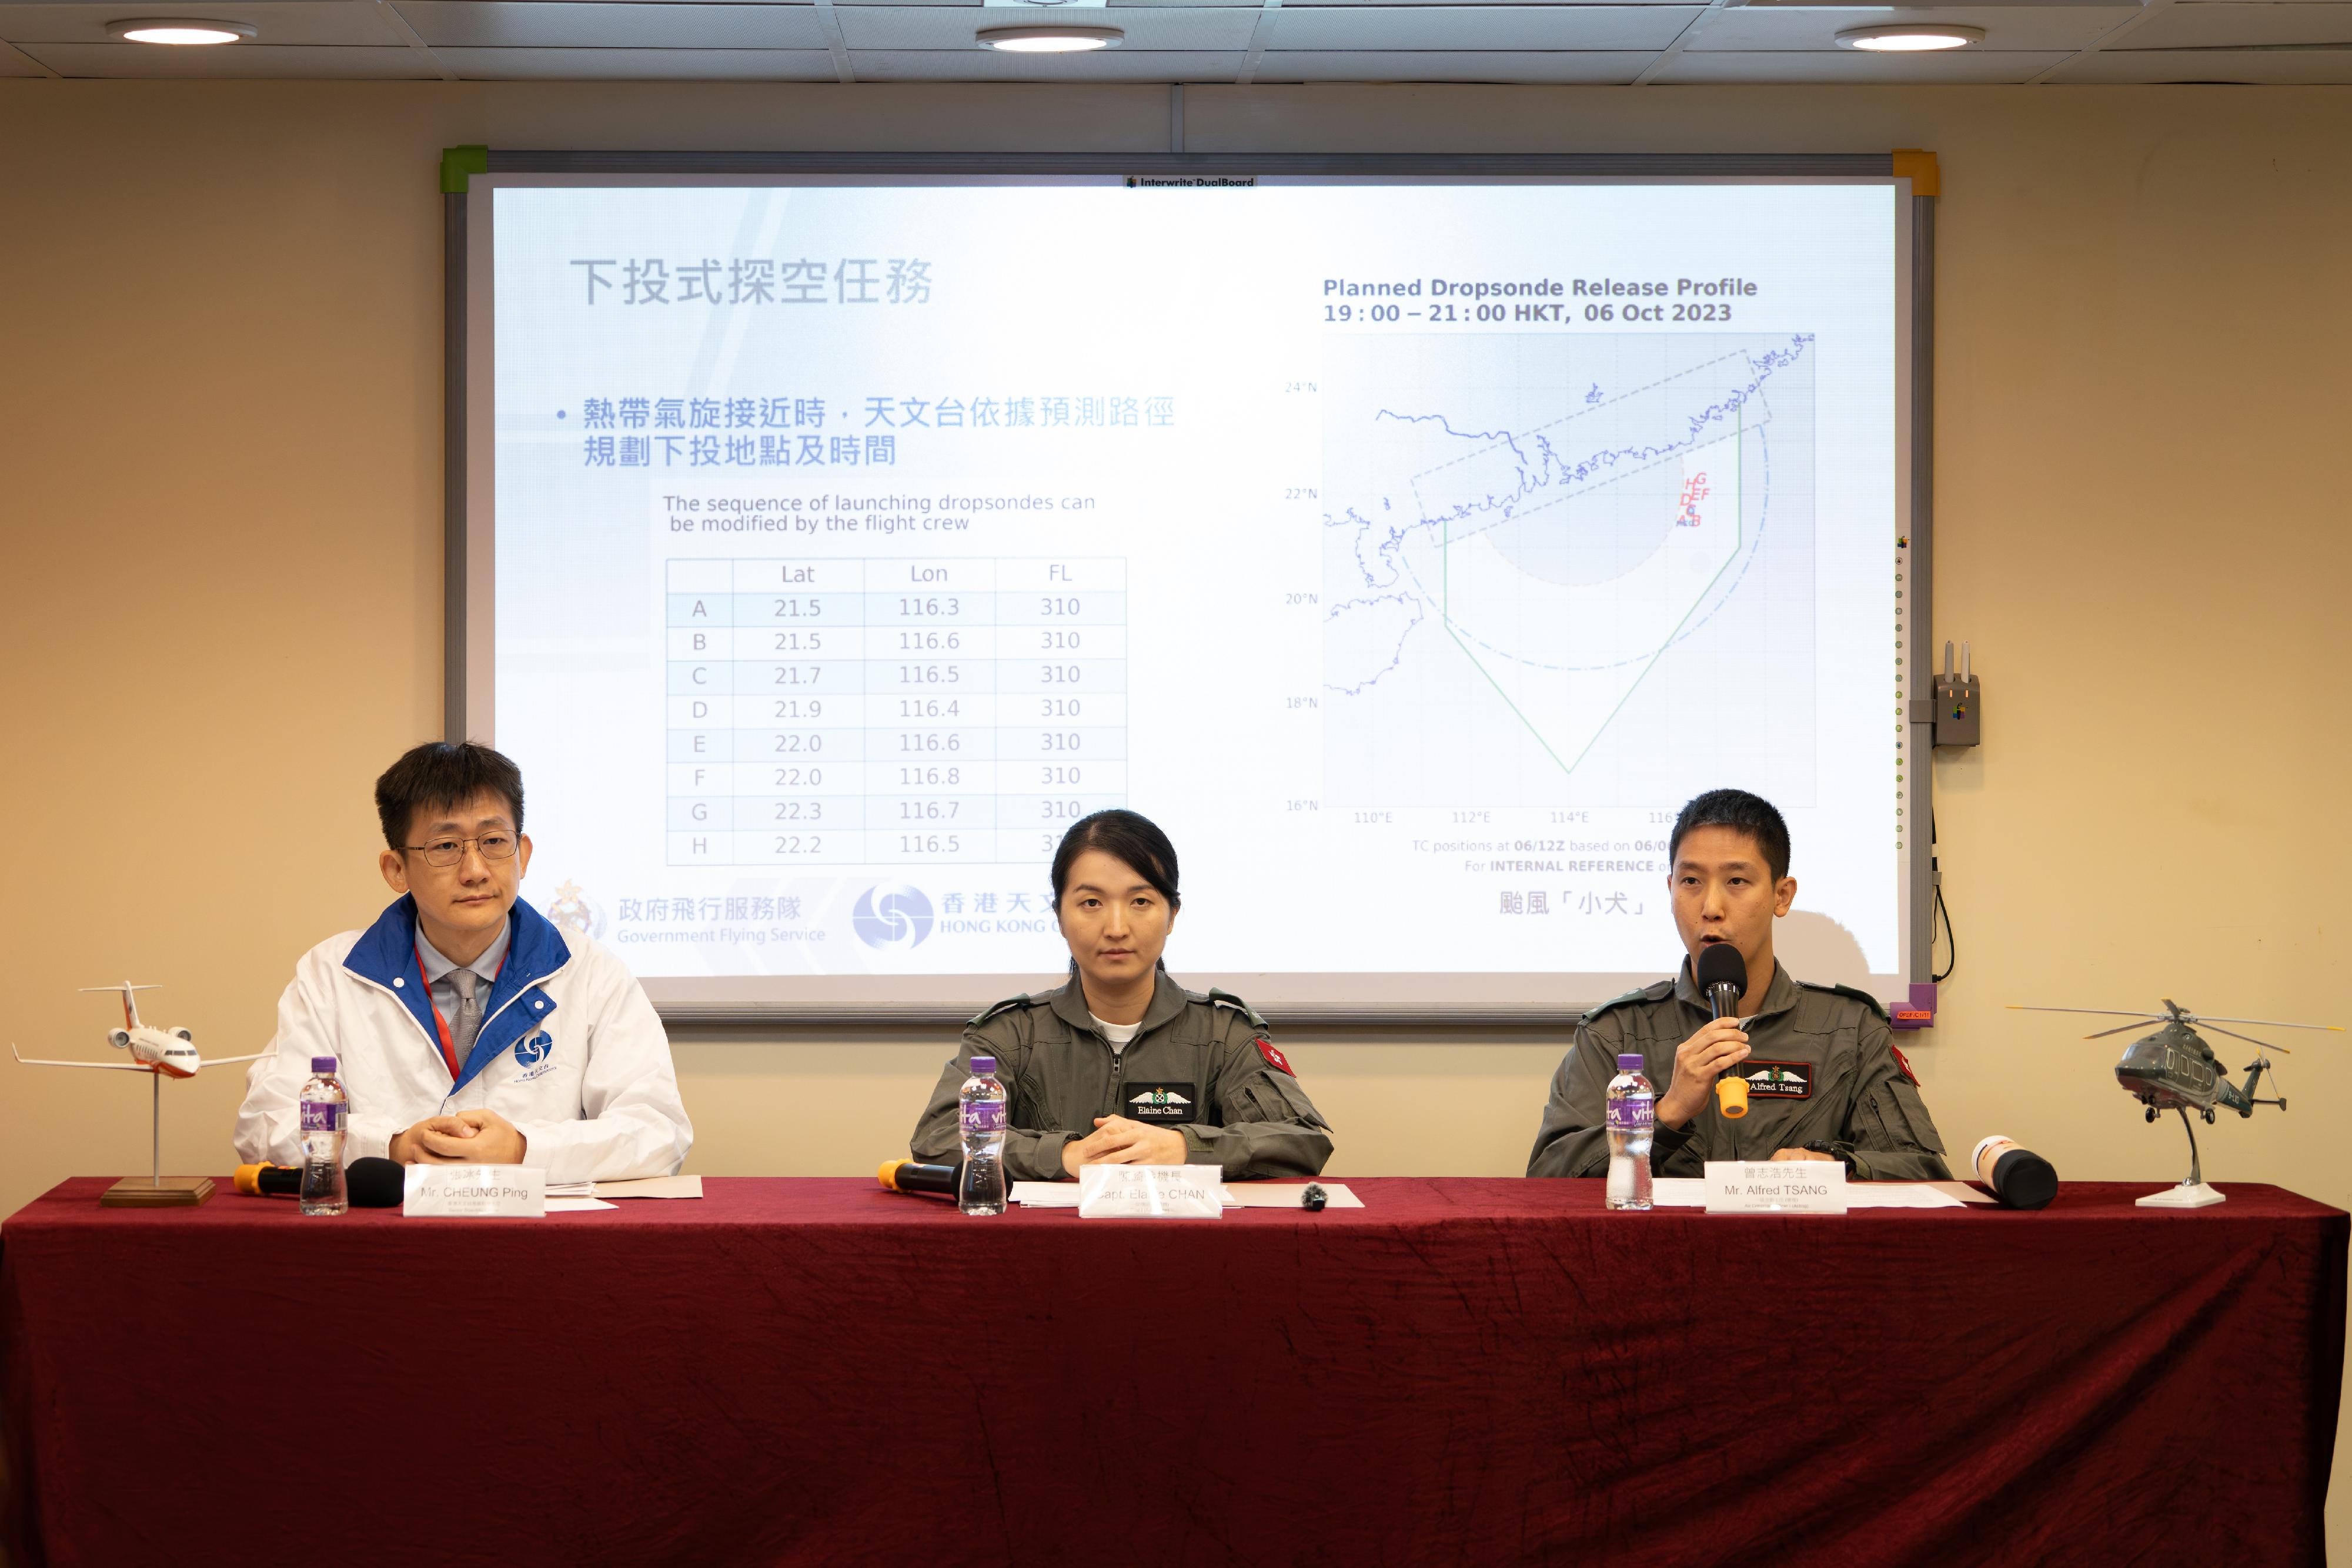 The Government Flying Service (GFS) and the Hong Kong Observatory (HKO) today (November 24) held a joint press conference on previous Tropical Cyclone Reconnaissance missions with the dropsonde system. Photo shows (from left) the Senior Scientific Officer (Aviation Meteorological Data Analytics) of the HKO, Mr Cheung Ping; Pilot I (Aeroplane) of the GFS, Captain Elaine Chan; and the Acting Air Crewman Officer I of the GFS, Mr Alfred Tsang, at the joint press conference.